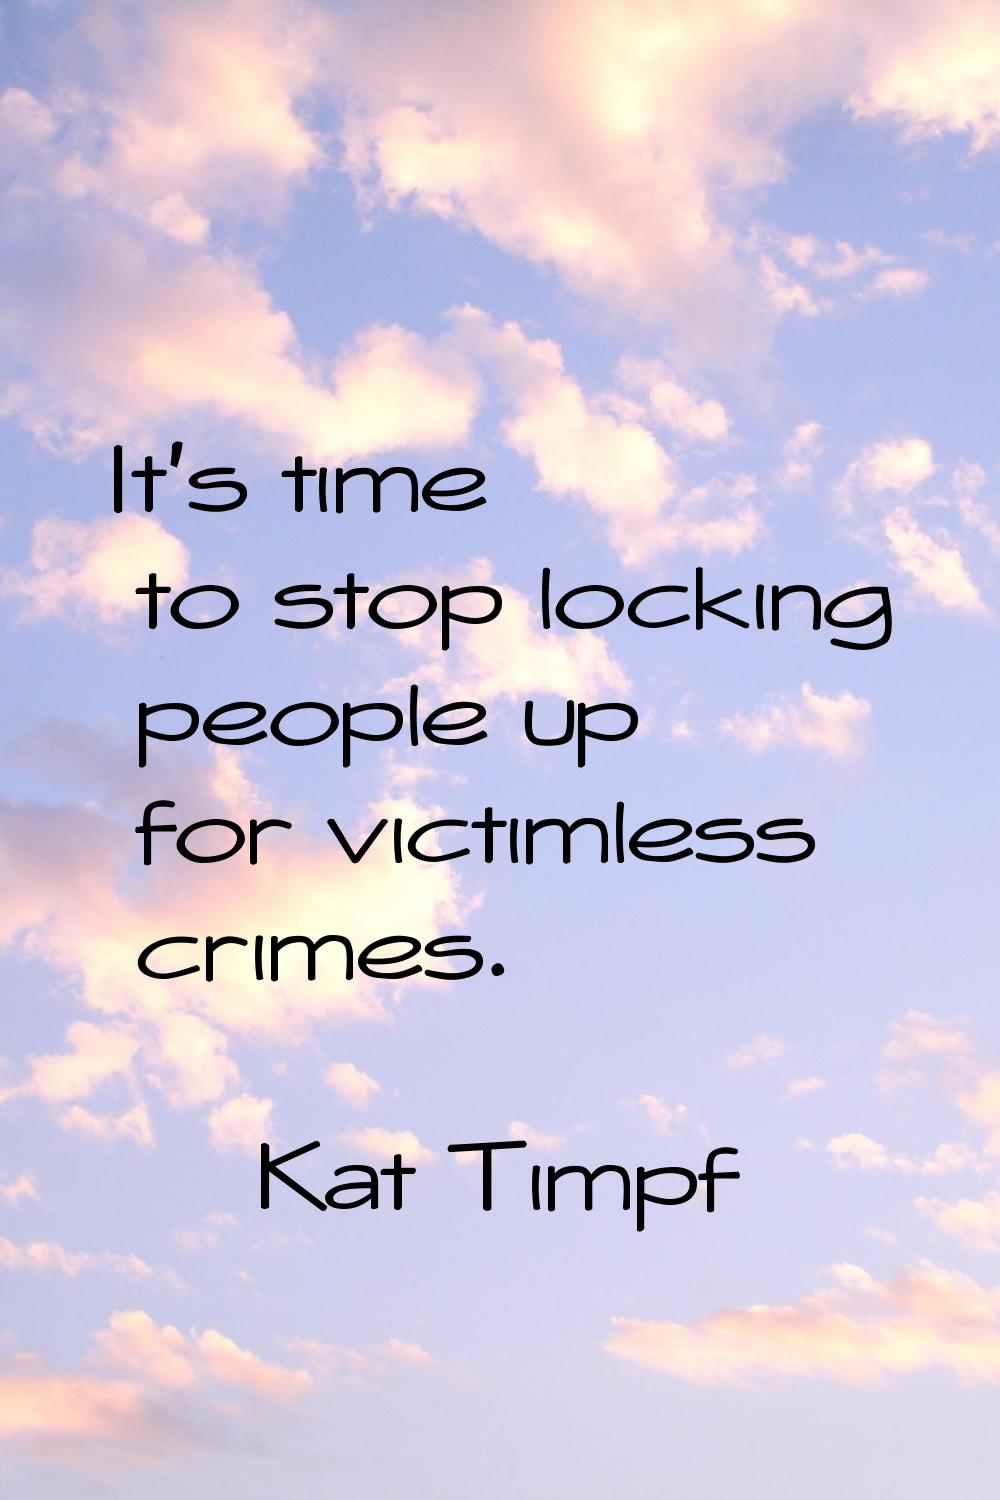 It's time to stop locking people up for victimless crimes.